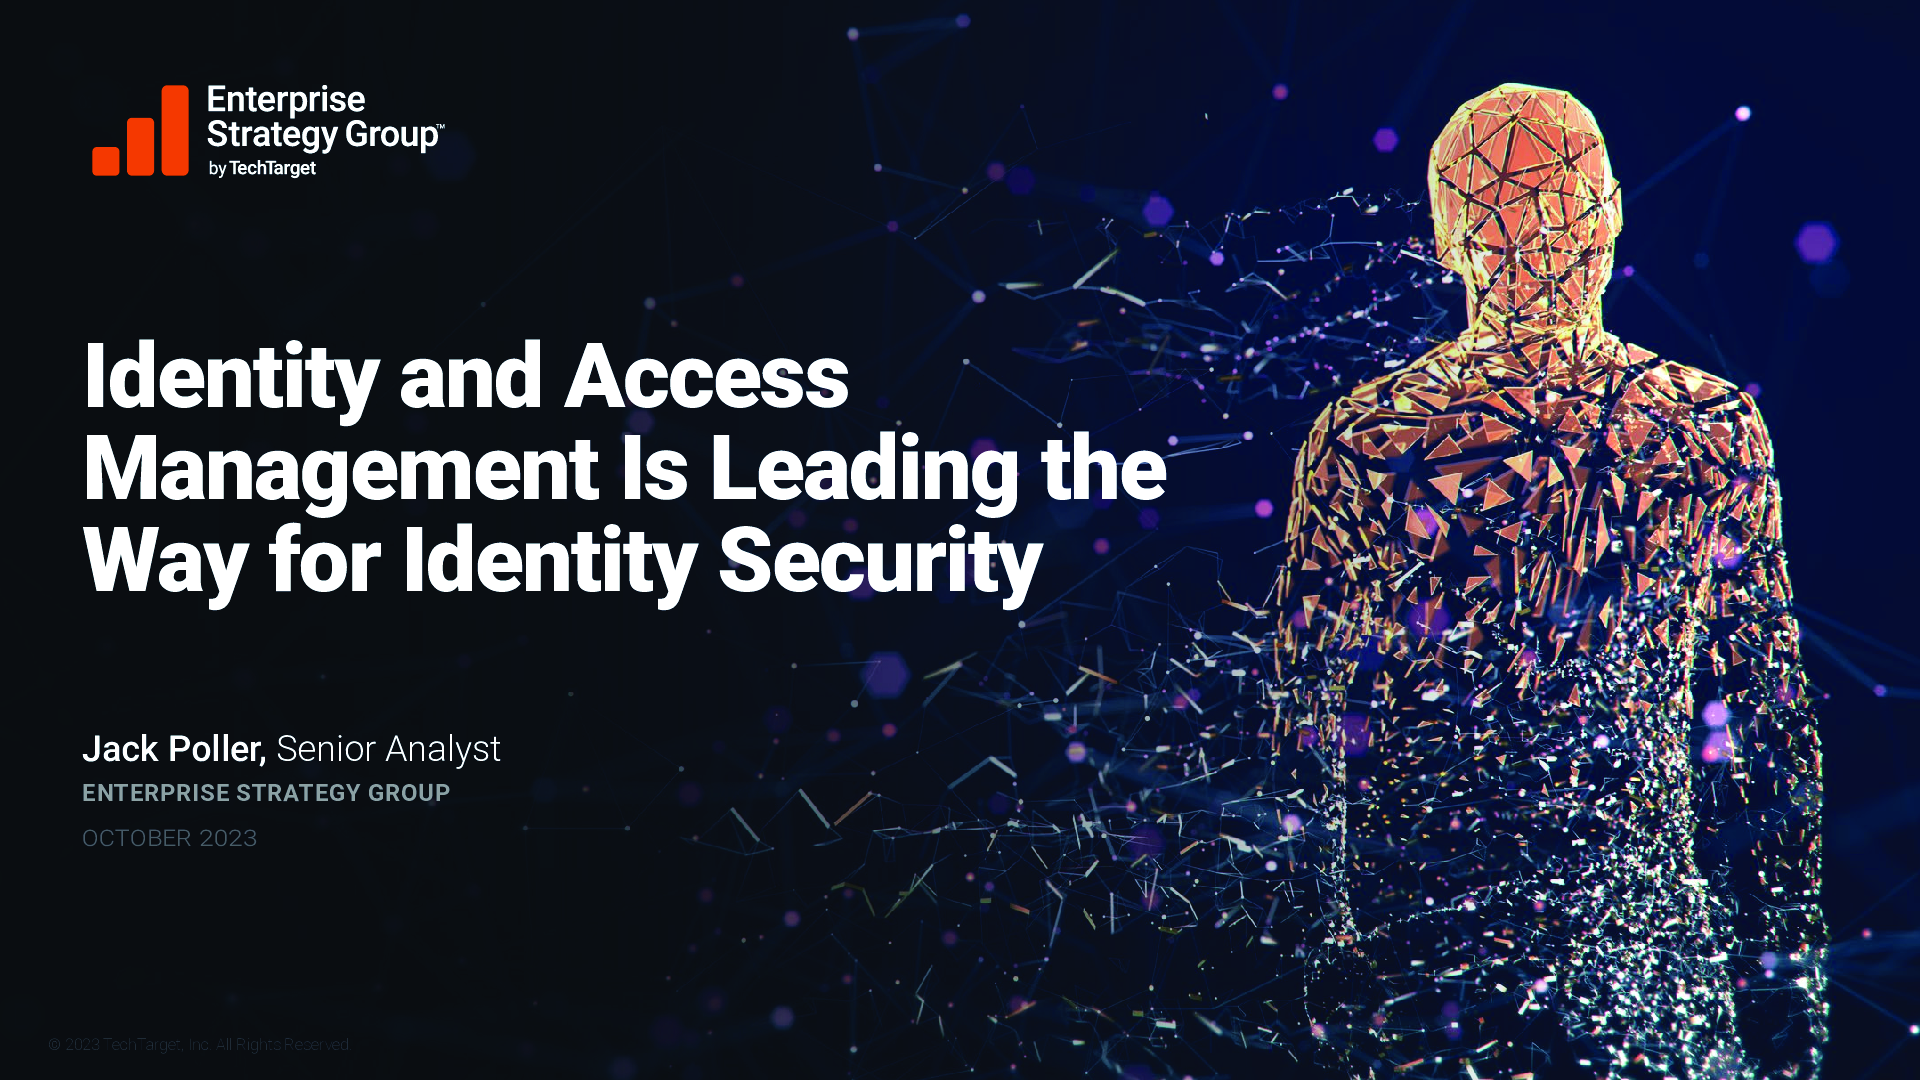 Identity and Access Management is Leading the Way for Identity Security